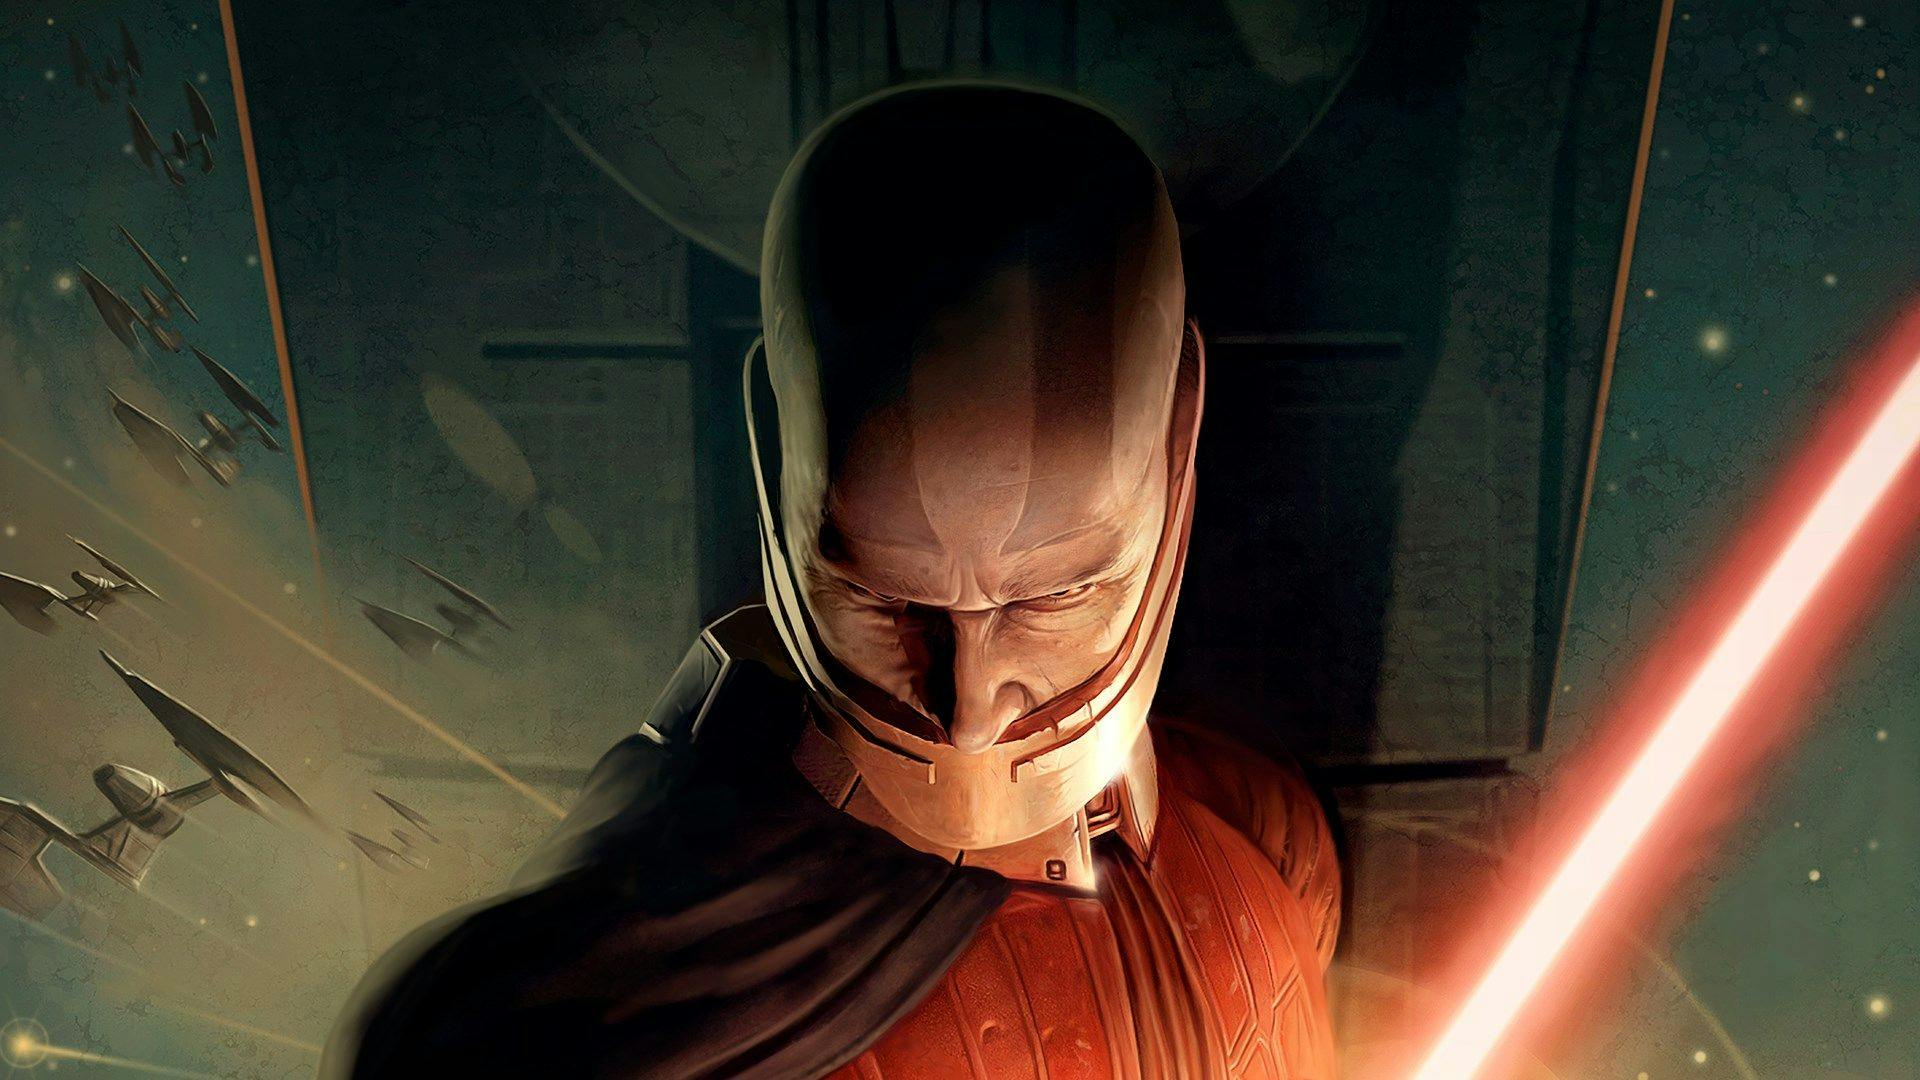 /3-best-kotor-builds-even-vader-would-approve-of-sc2537dh feature image